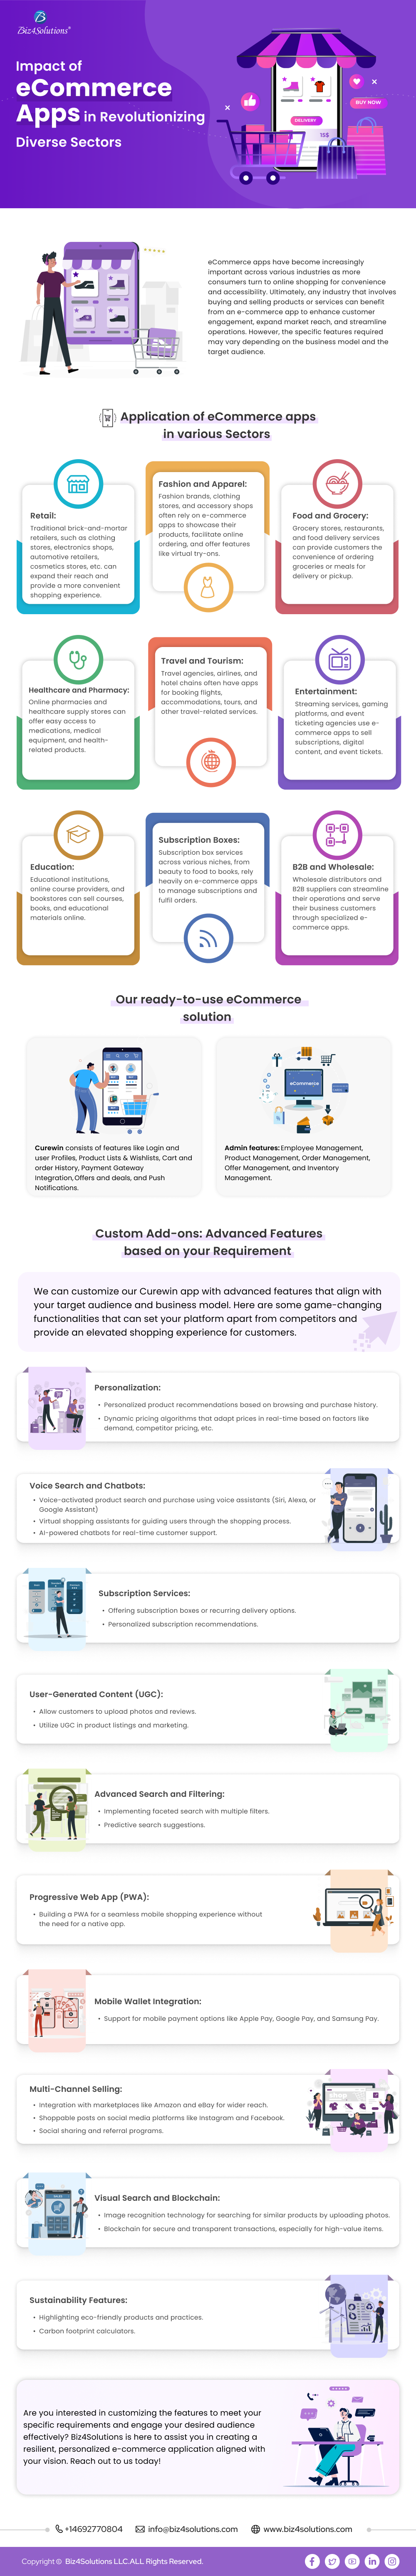 application of ecommerce app in different industries